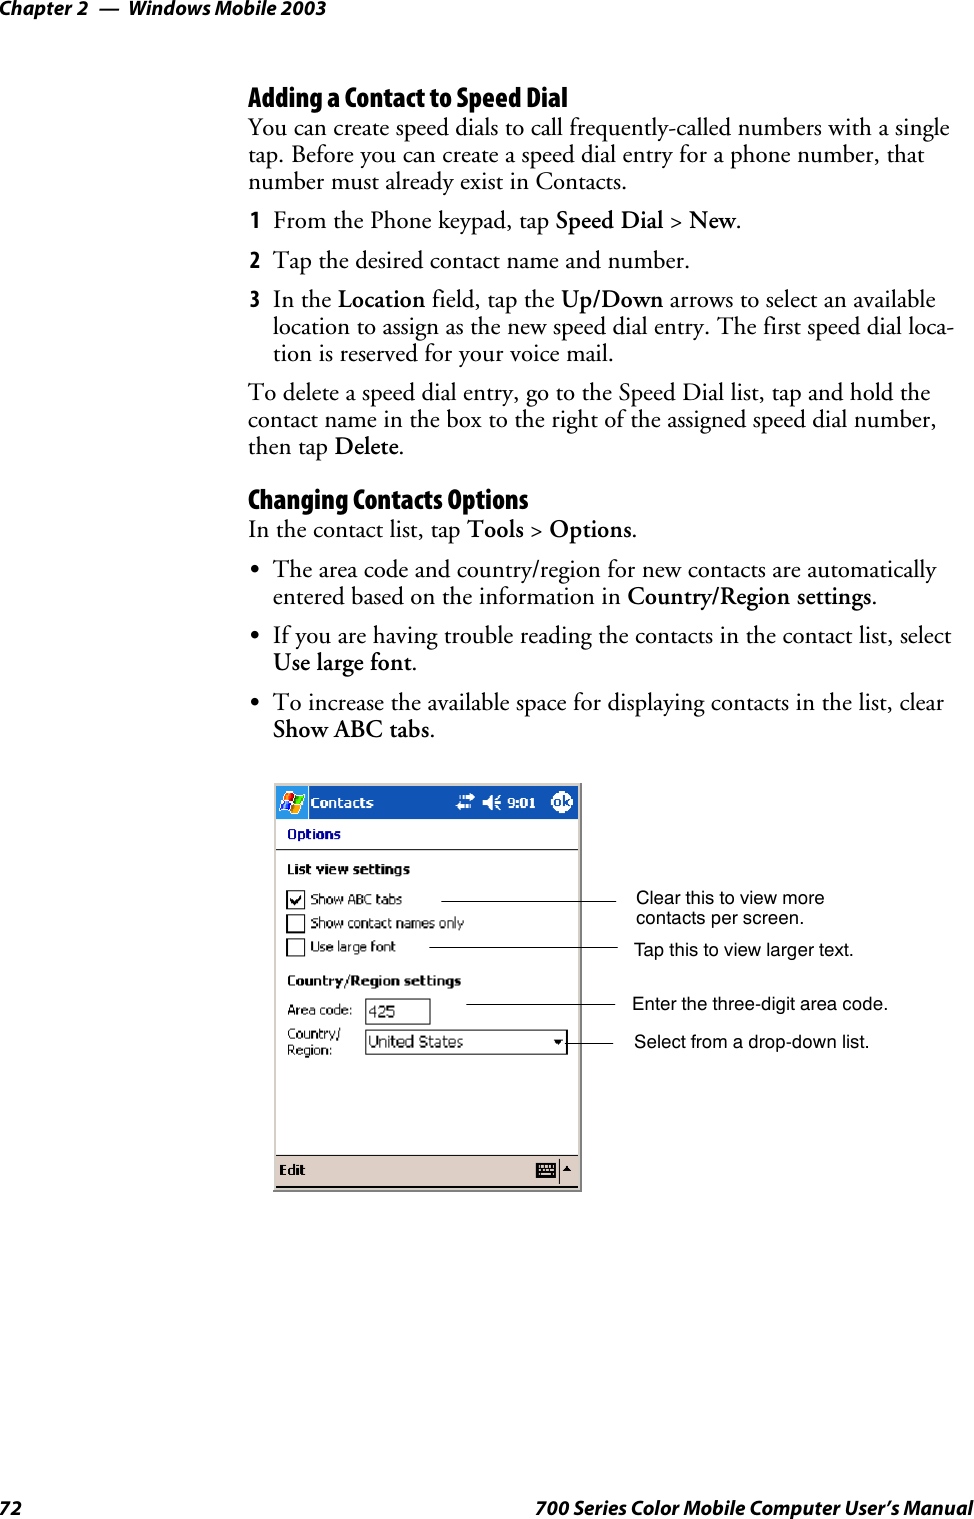 Windows Mobile 2003Chapter —272 700 Series Color Mobile Computer User’s ManualAdding a Contact to Speed DialYou can create speed dials to call frequently-called numbers with a singletap. Before you can create a speed dial entry for a phone number, thatnumber must already exist in Contacts.1From the Phone keypad, tap Speed Dial &gt;New.2Tapthedesiredcontactnameandnumber.3In the Location field, tap the Up/Down arrows to select an availablelocation to assign as the new speed dial entry. The first speed dial loca-tion is reserved for your voice mail.To delete a speed dial entry, go to the Speed Dial list, tap and hold thecontact name in the box to the right of the assigned speed dial number,then tap Delete.Changing Contacts OptionsIn the contact list, tap Tools &gt;Options.SThe area code and country/region for new contacts are automaticallyentered based on the information in Country/Region settings.SIf you are having trouble reading the contacts in the contact list, selectUse large font.STo increase the available space for displaying contacts in the list, clearShow ABC tabs.Enter the three-digit area code.Select from a drop-down list.Tap this to view larger text.Clear this to view morecontacts per screen.